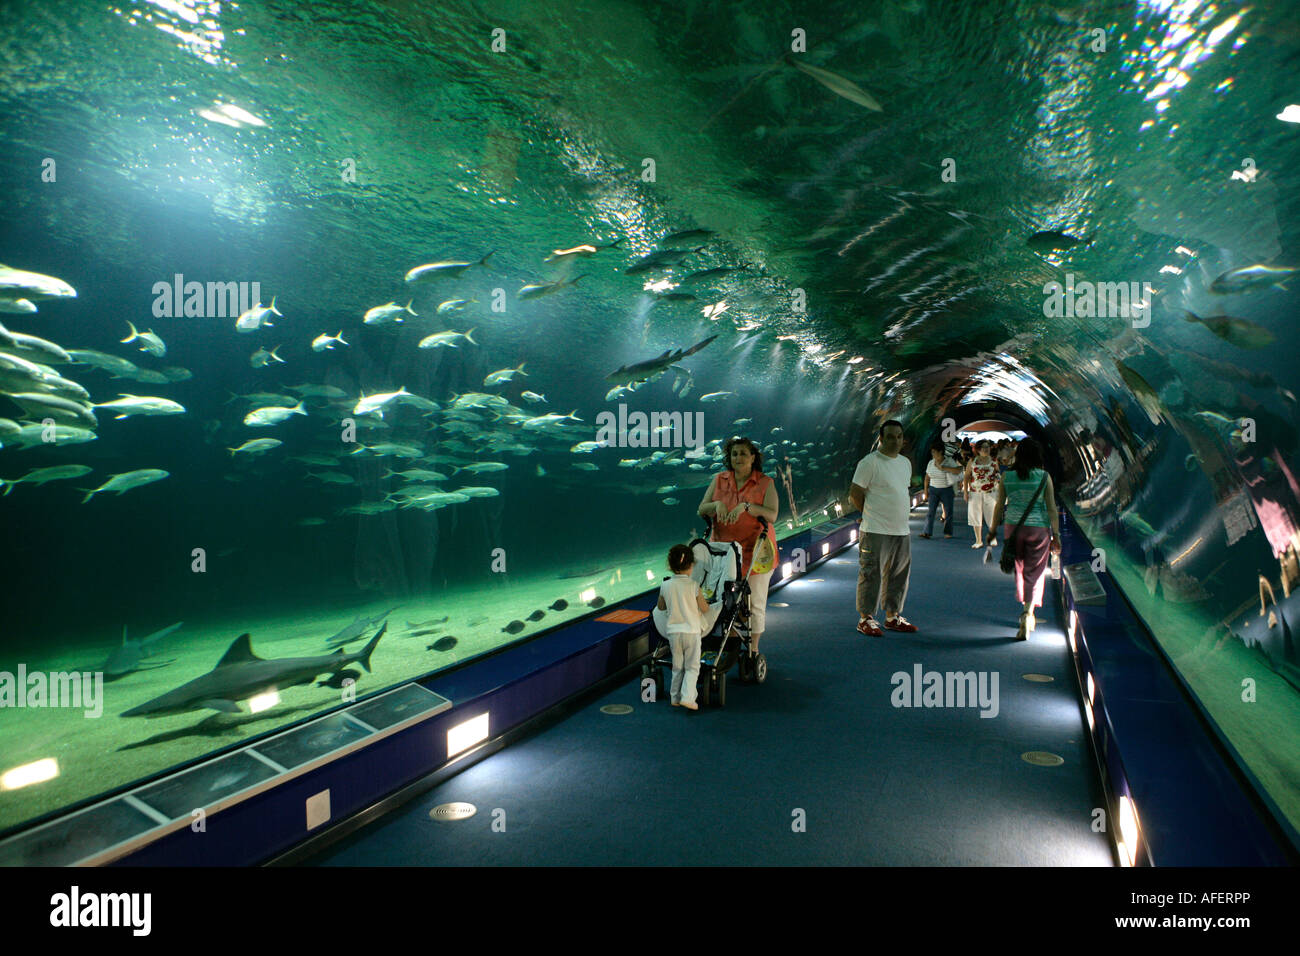 People looking at Aquarium tunnel of Fish in sea Life Centre Stock Photo